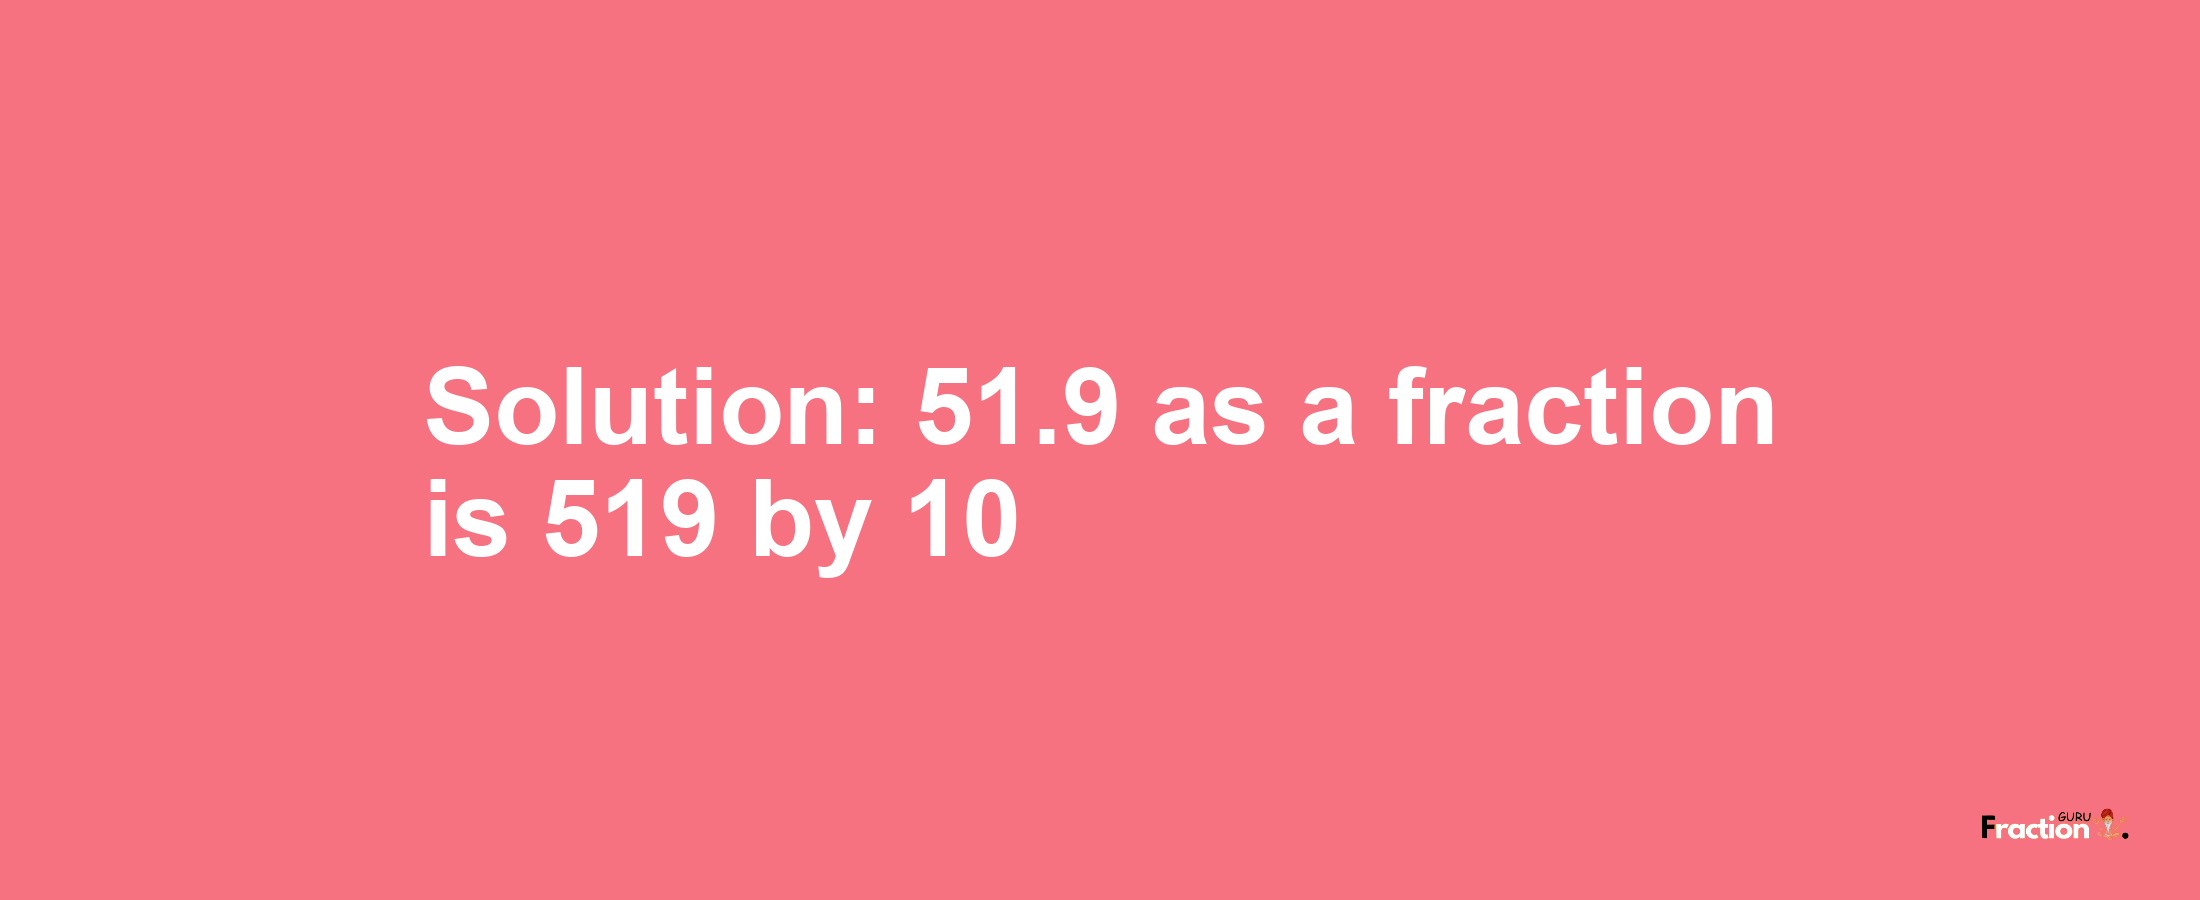 Solution:51.9 as a fraction is 519/10